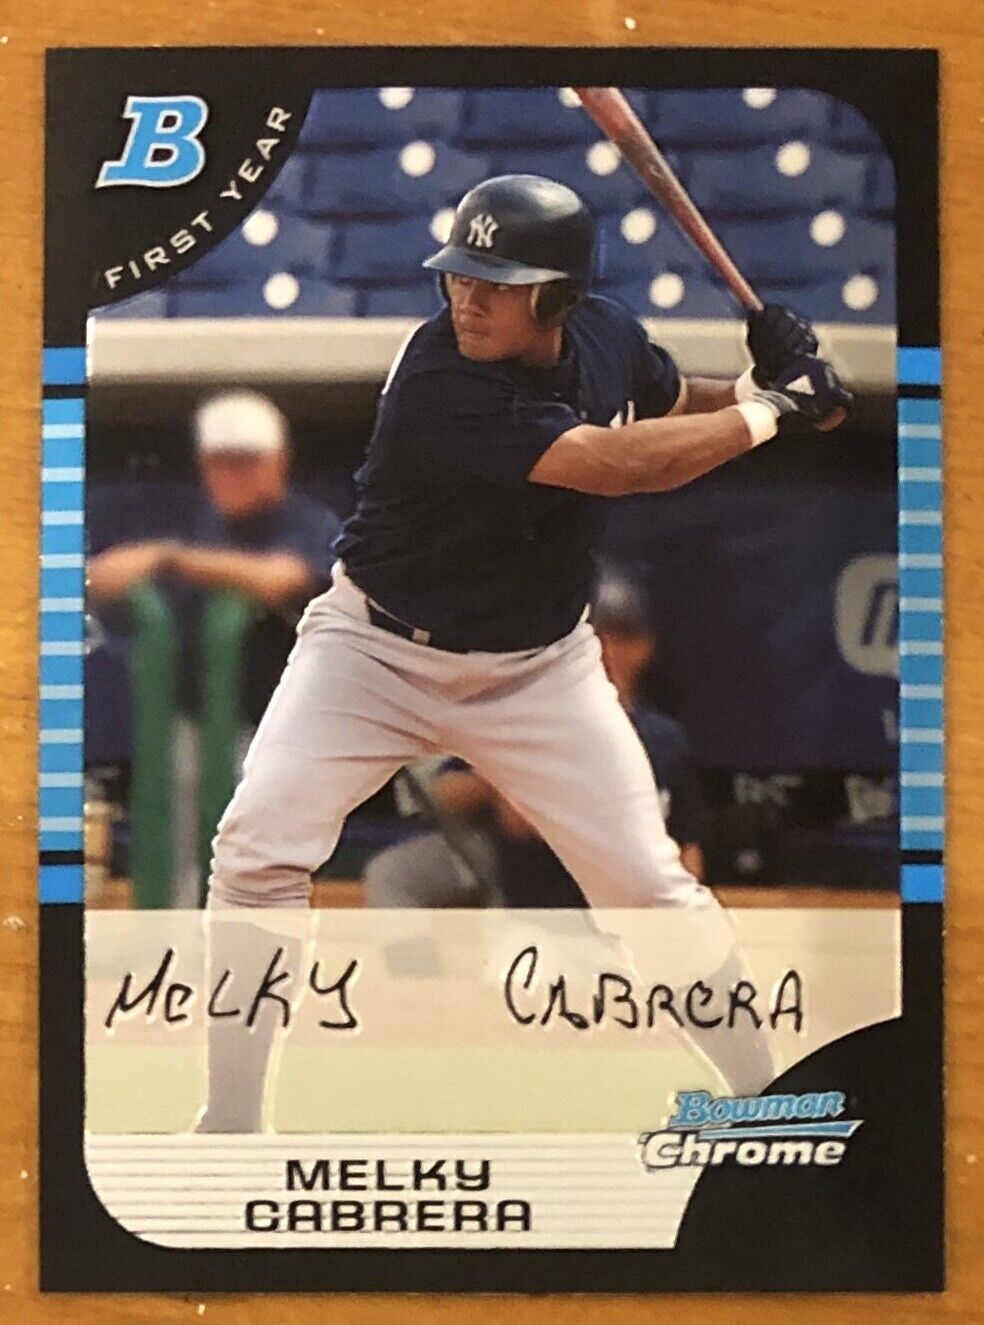 MELKY CABRERA, ROOKIE CARD,'05 BOWMAN CHROME, MINT CONDITION ! SUPERSTAR. rookie card picture